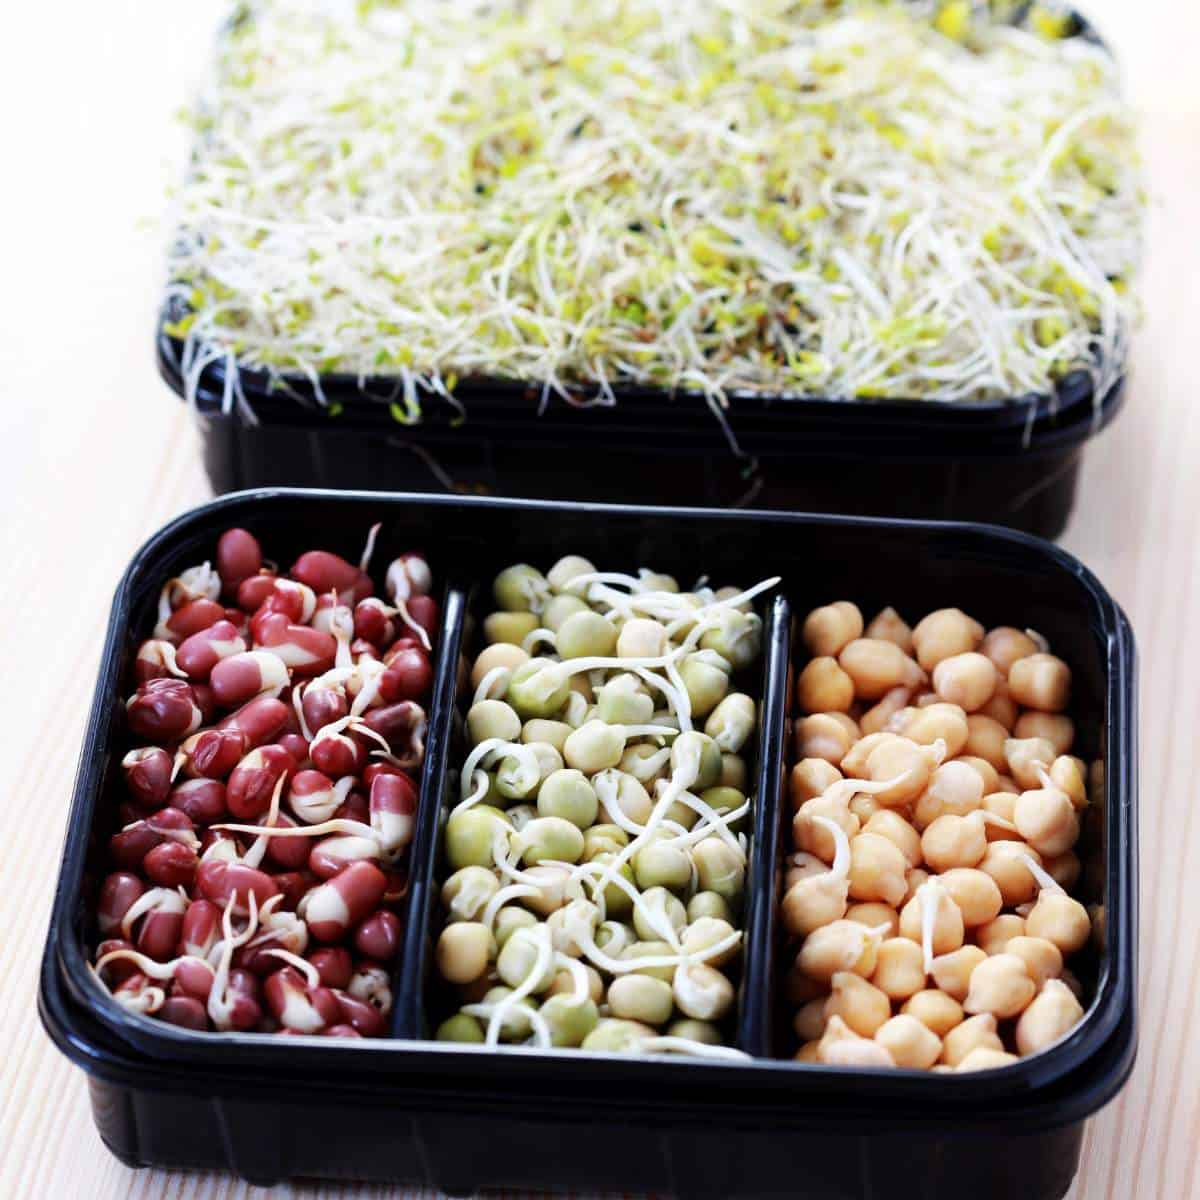 A tray of sprouted beans and peas stored on a wooden table.